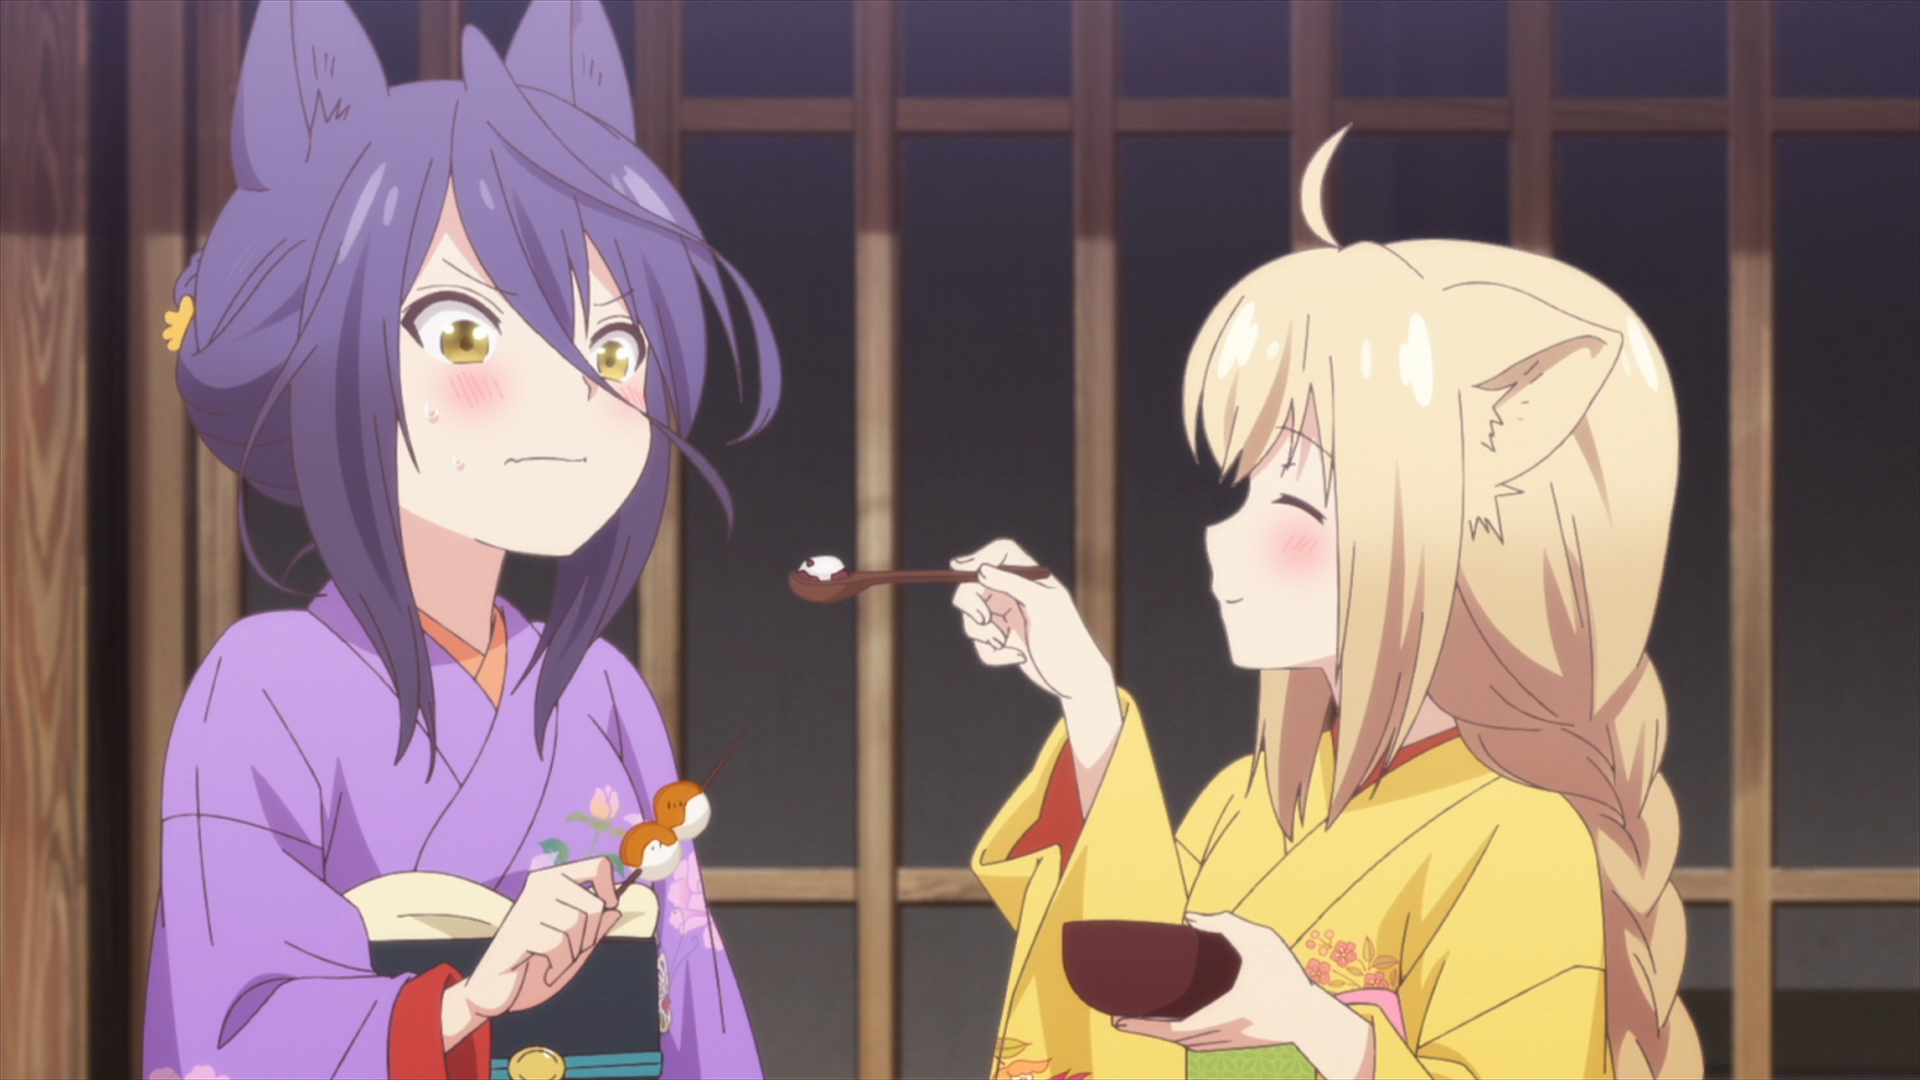 Satsuki blushes as Yuzu offers up a bite of her rice and bean confection in a scene from the KONOHANA KITAN TV anime.